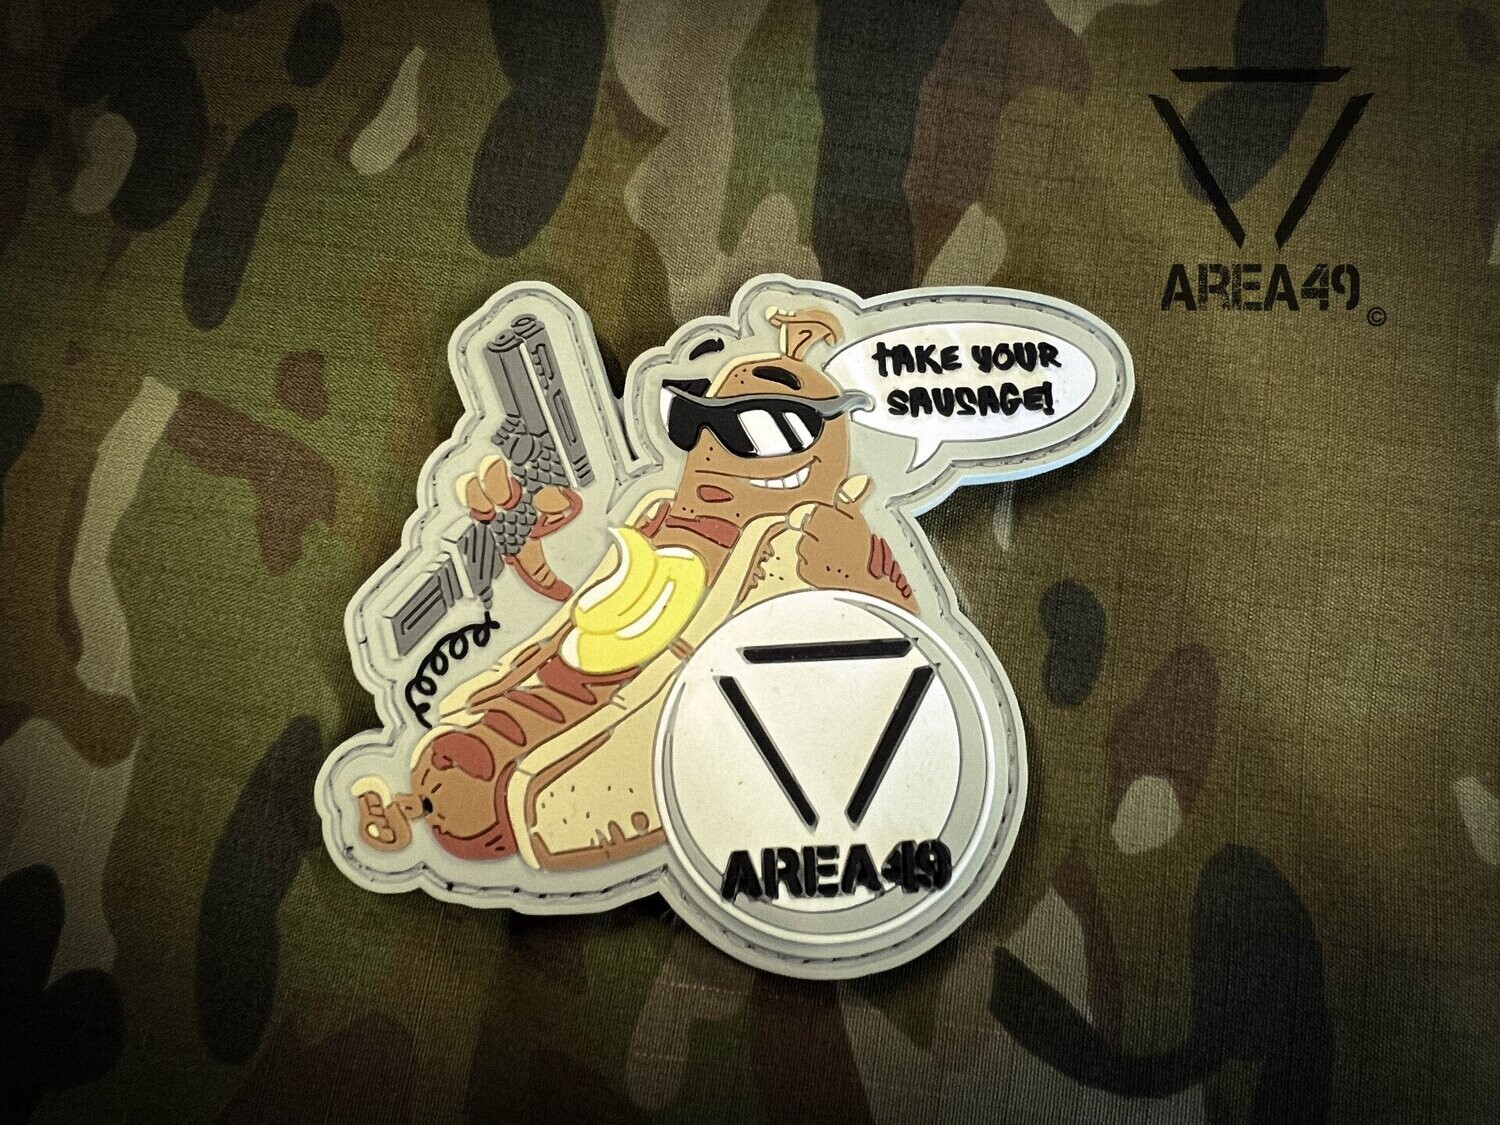 [Area49] "Take Your Sausage" Patch